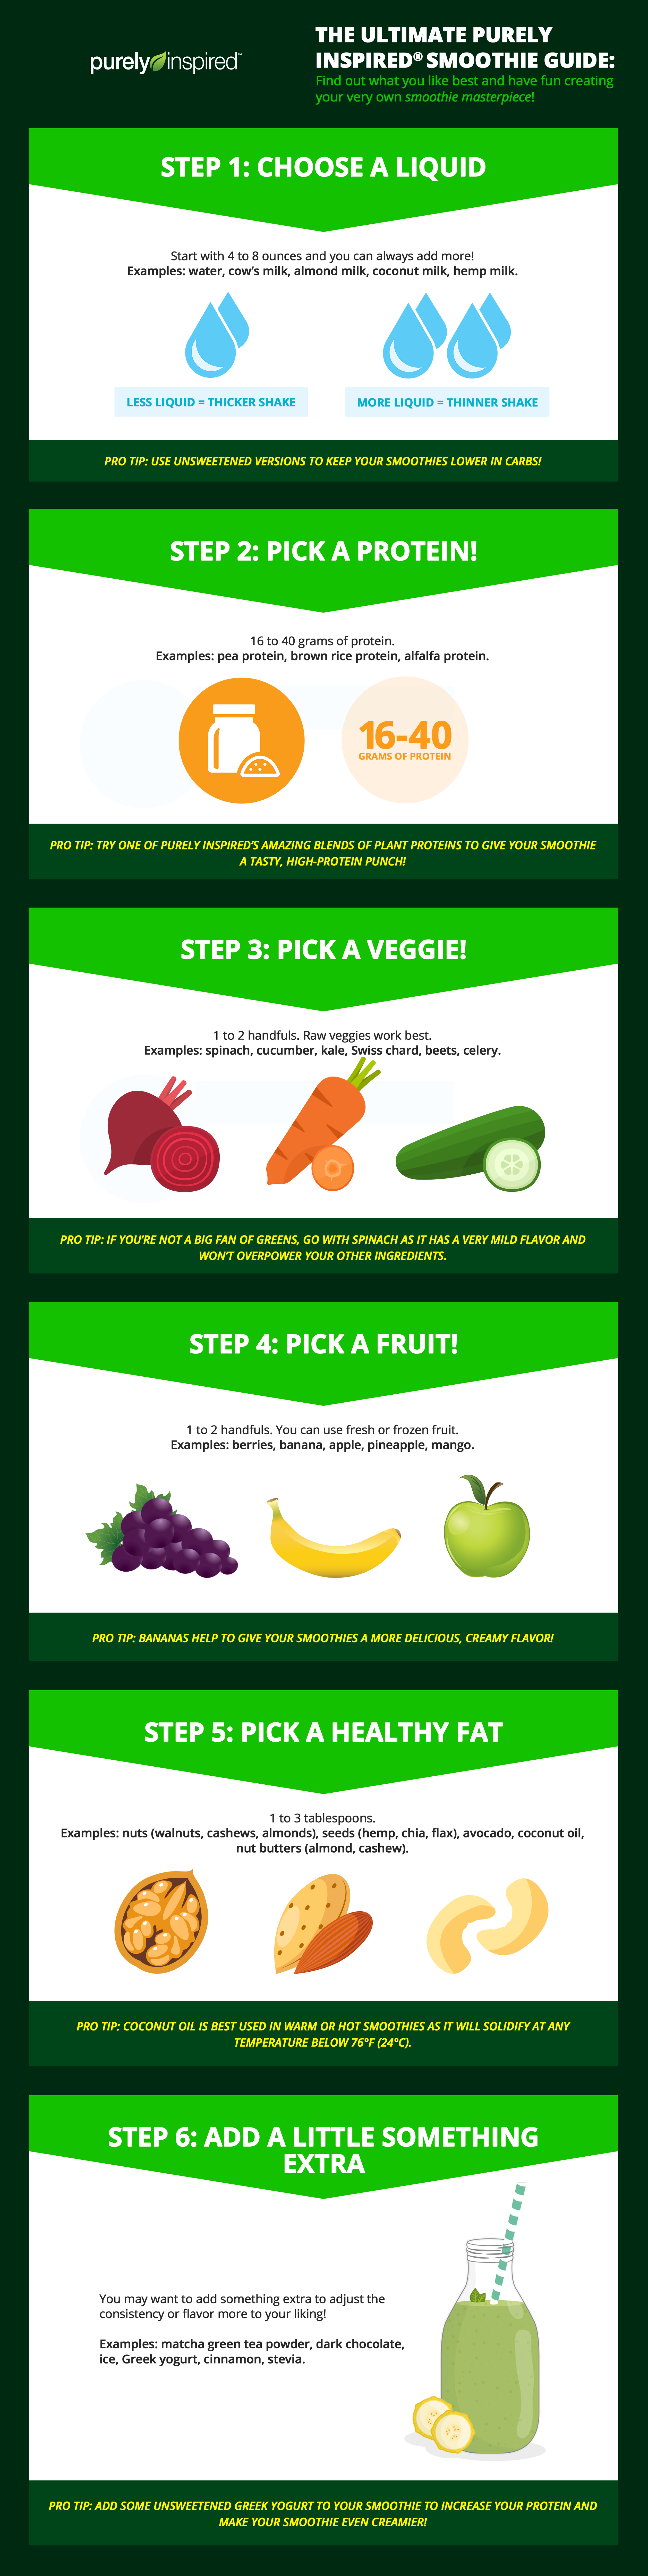 The Ultimate Purely Inspired Smoothie Guide